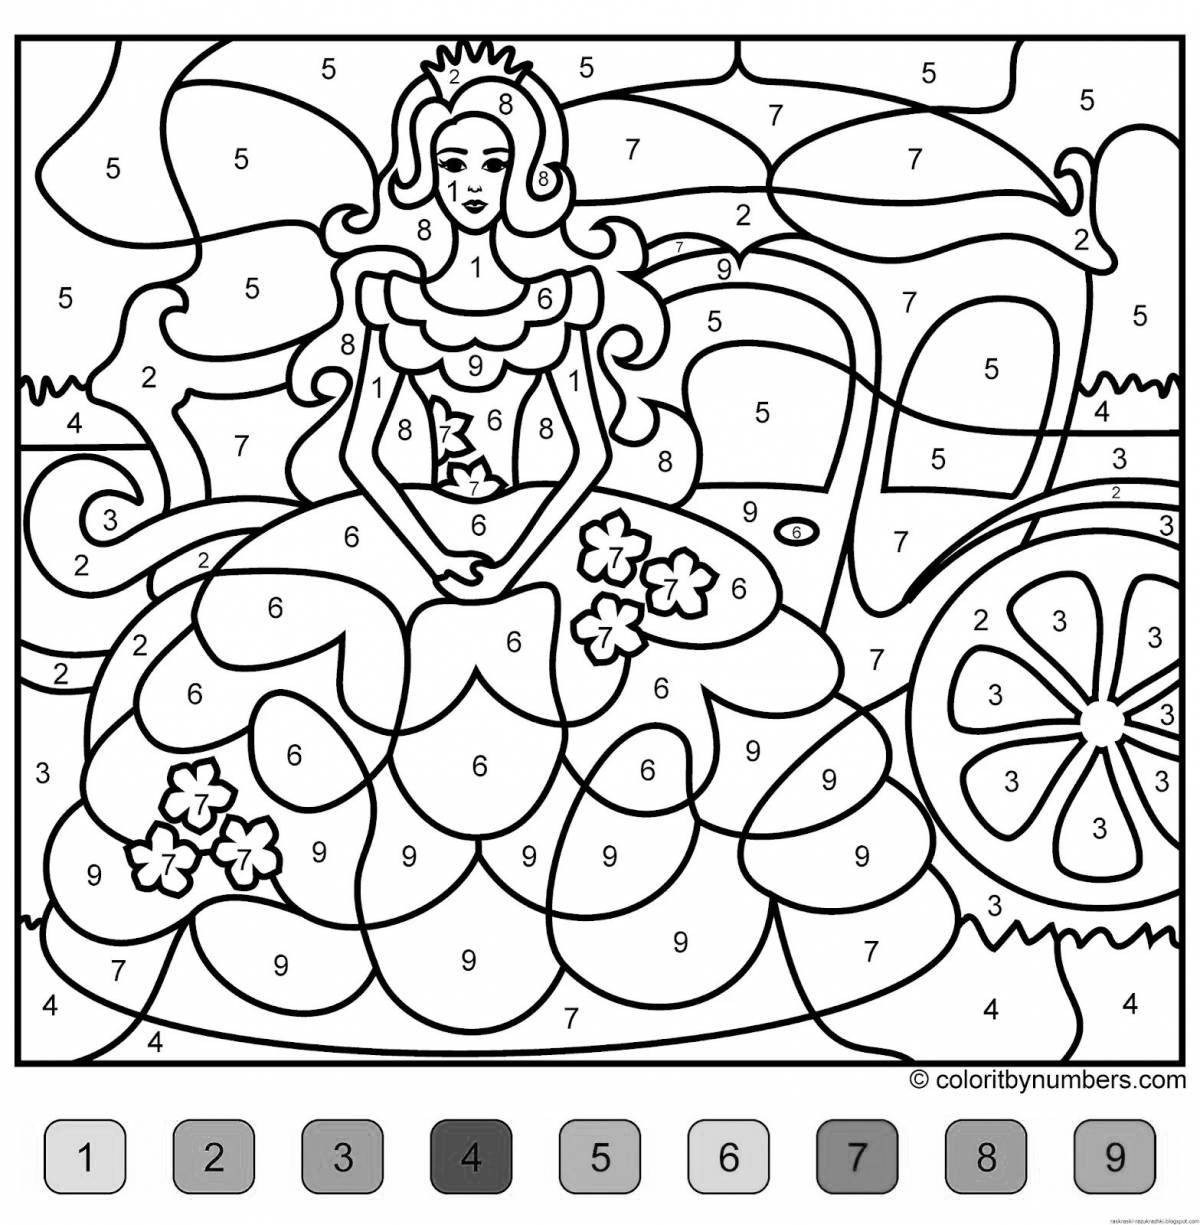 Great coloring game for 10 year old girls